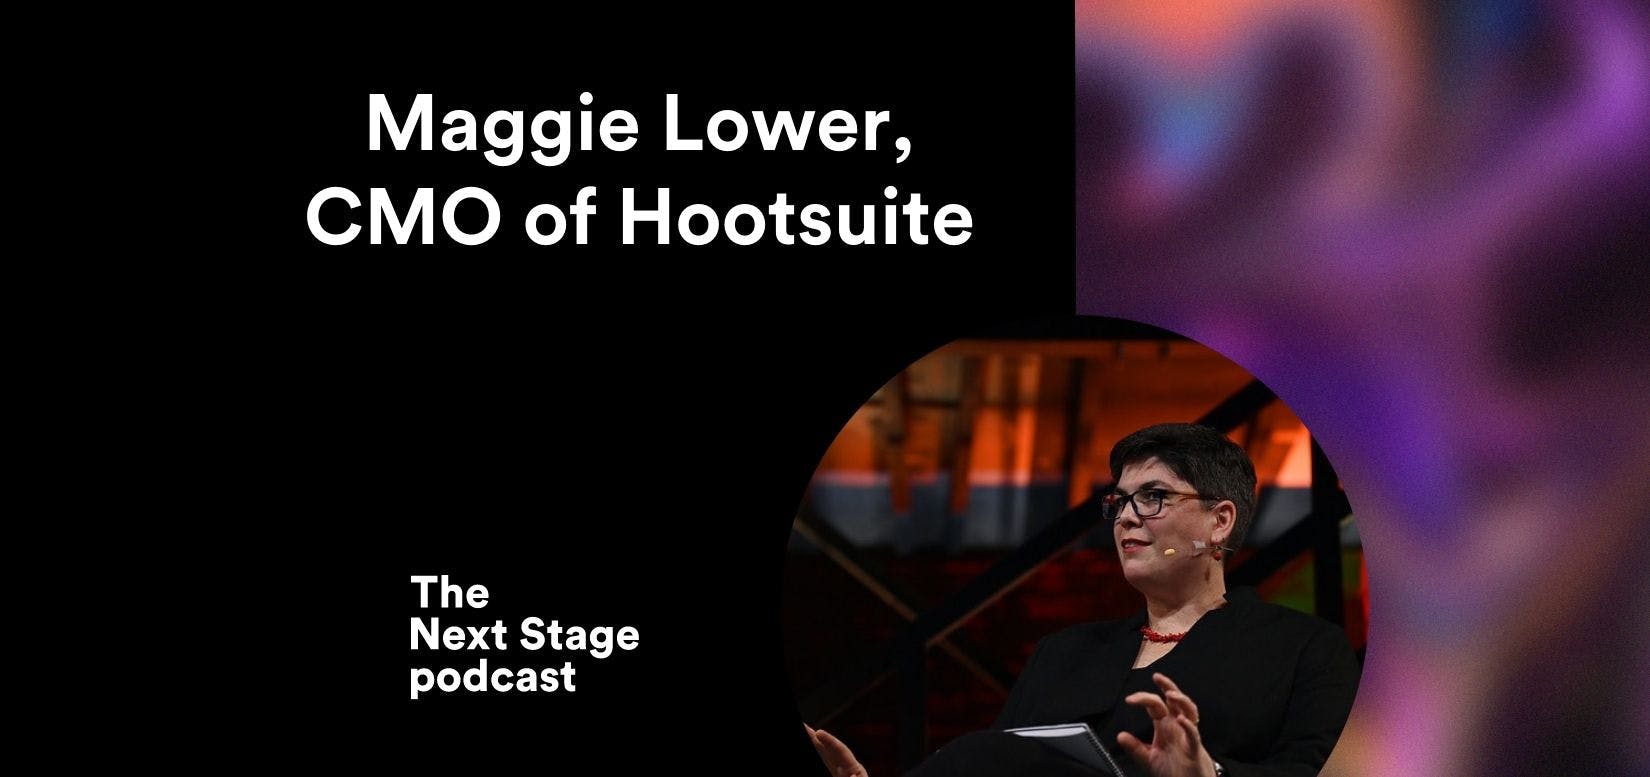 Maggie Lower, CMO of Hootsuite